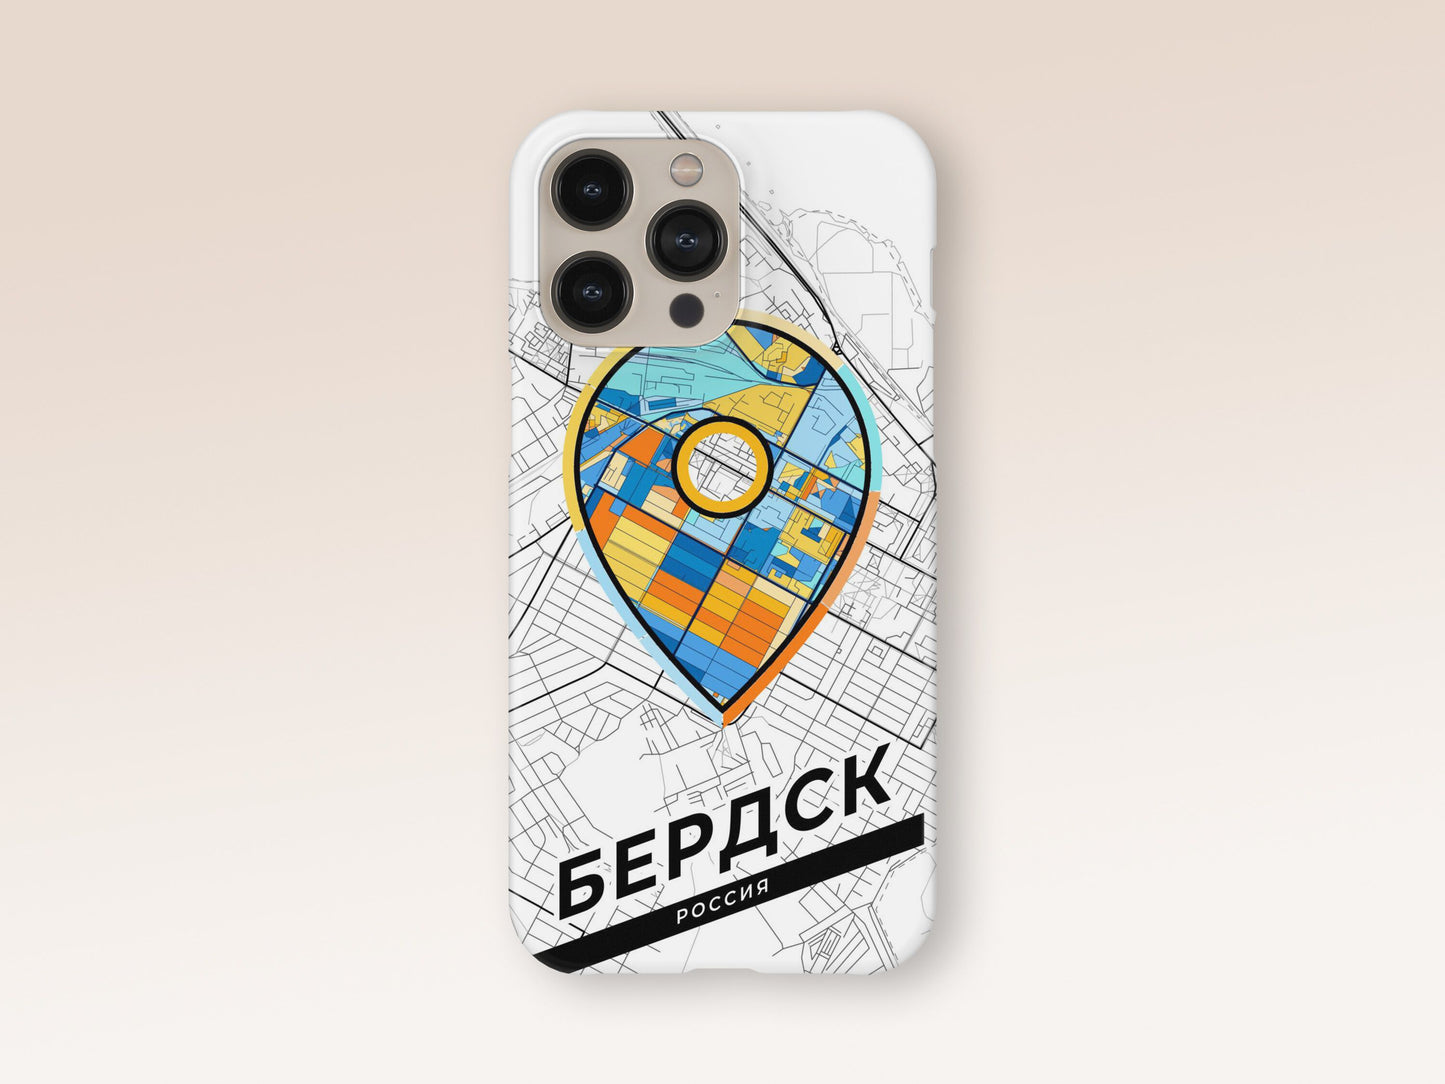 Berdsk Russia slim phone case with colorful icon. Birthday, wedding or housewarming gift. Couple match cases. 1